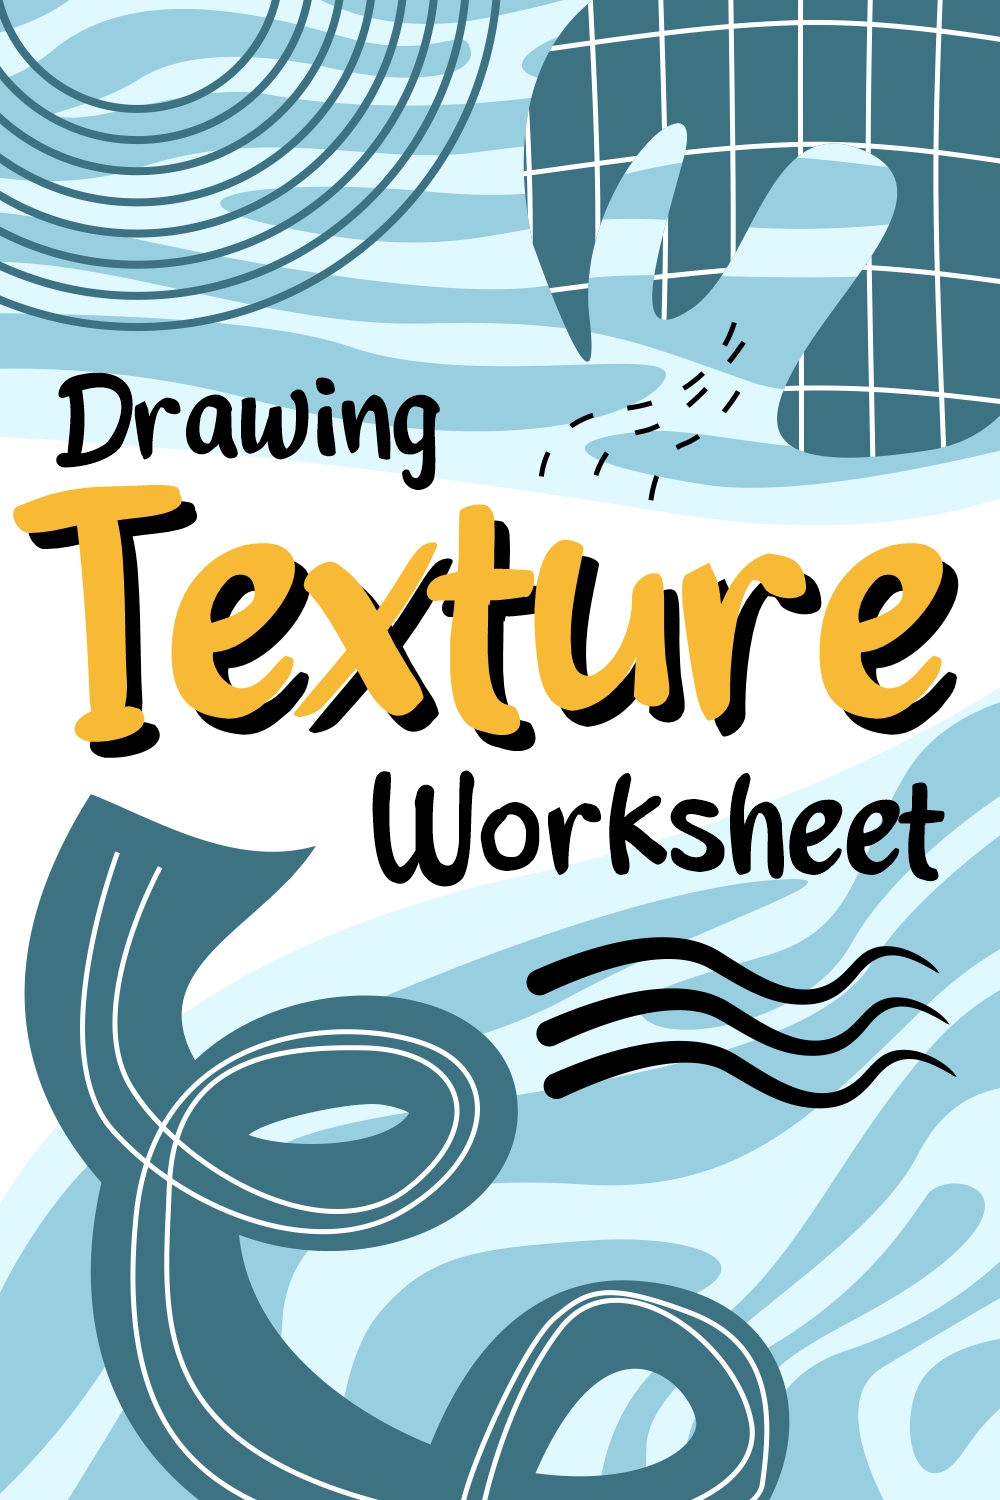 15 Images of Drawing Texture Worksheet